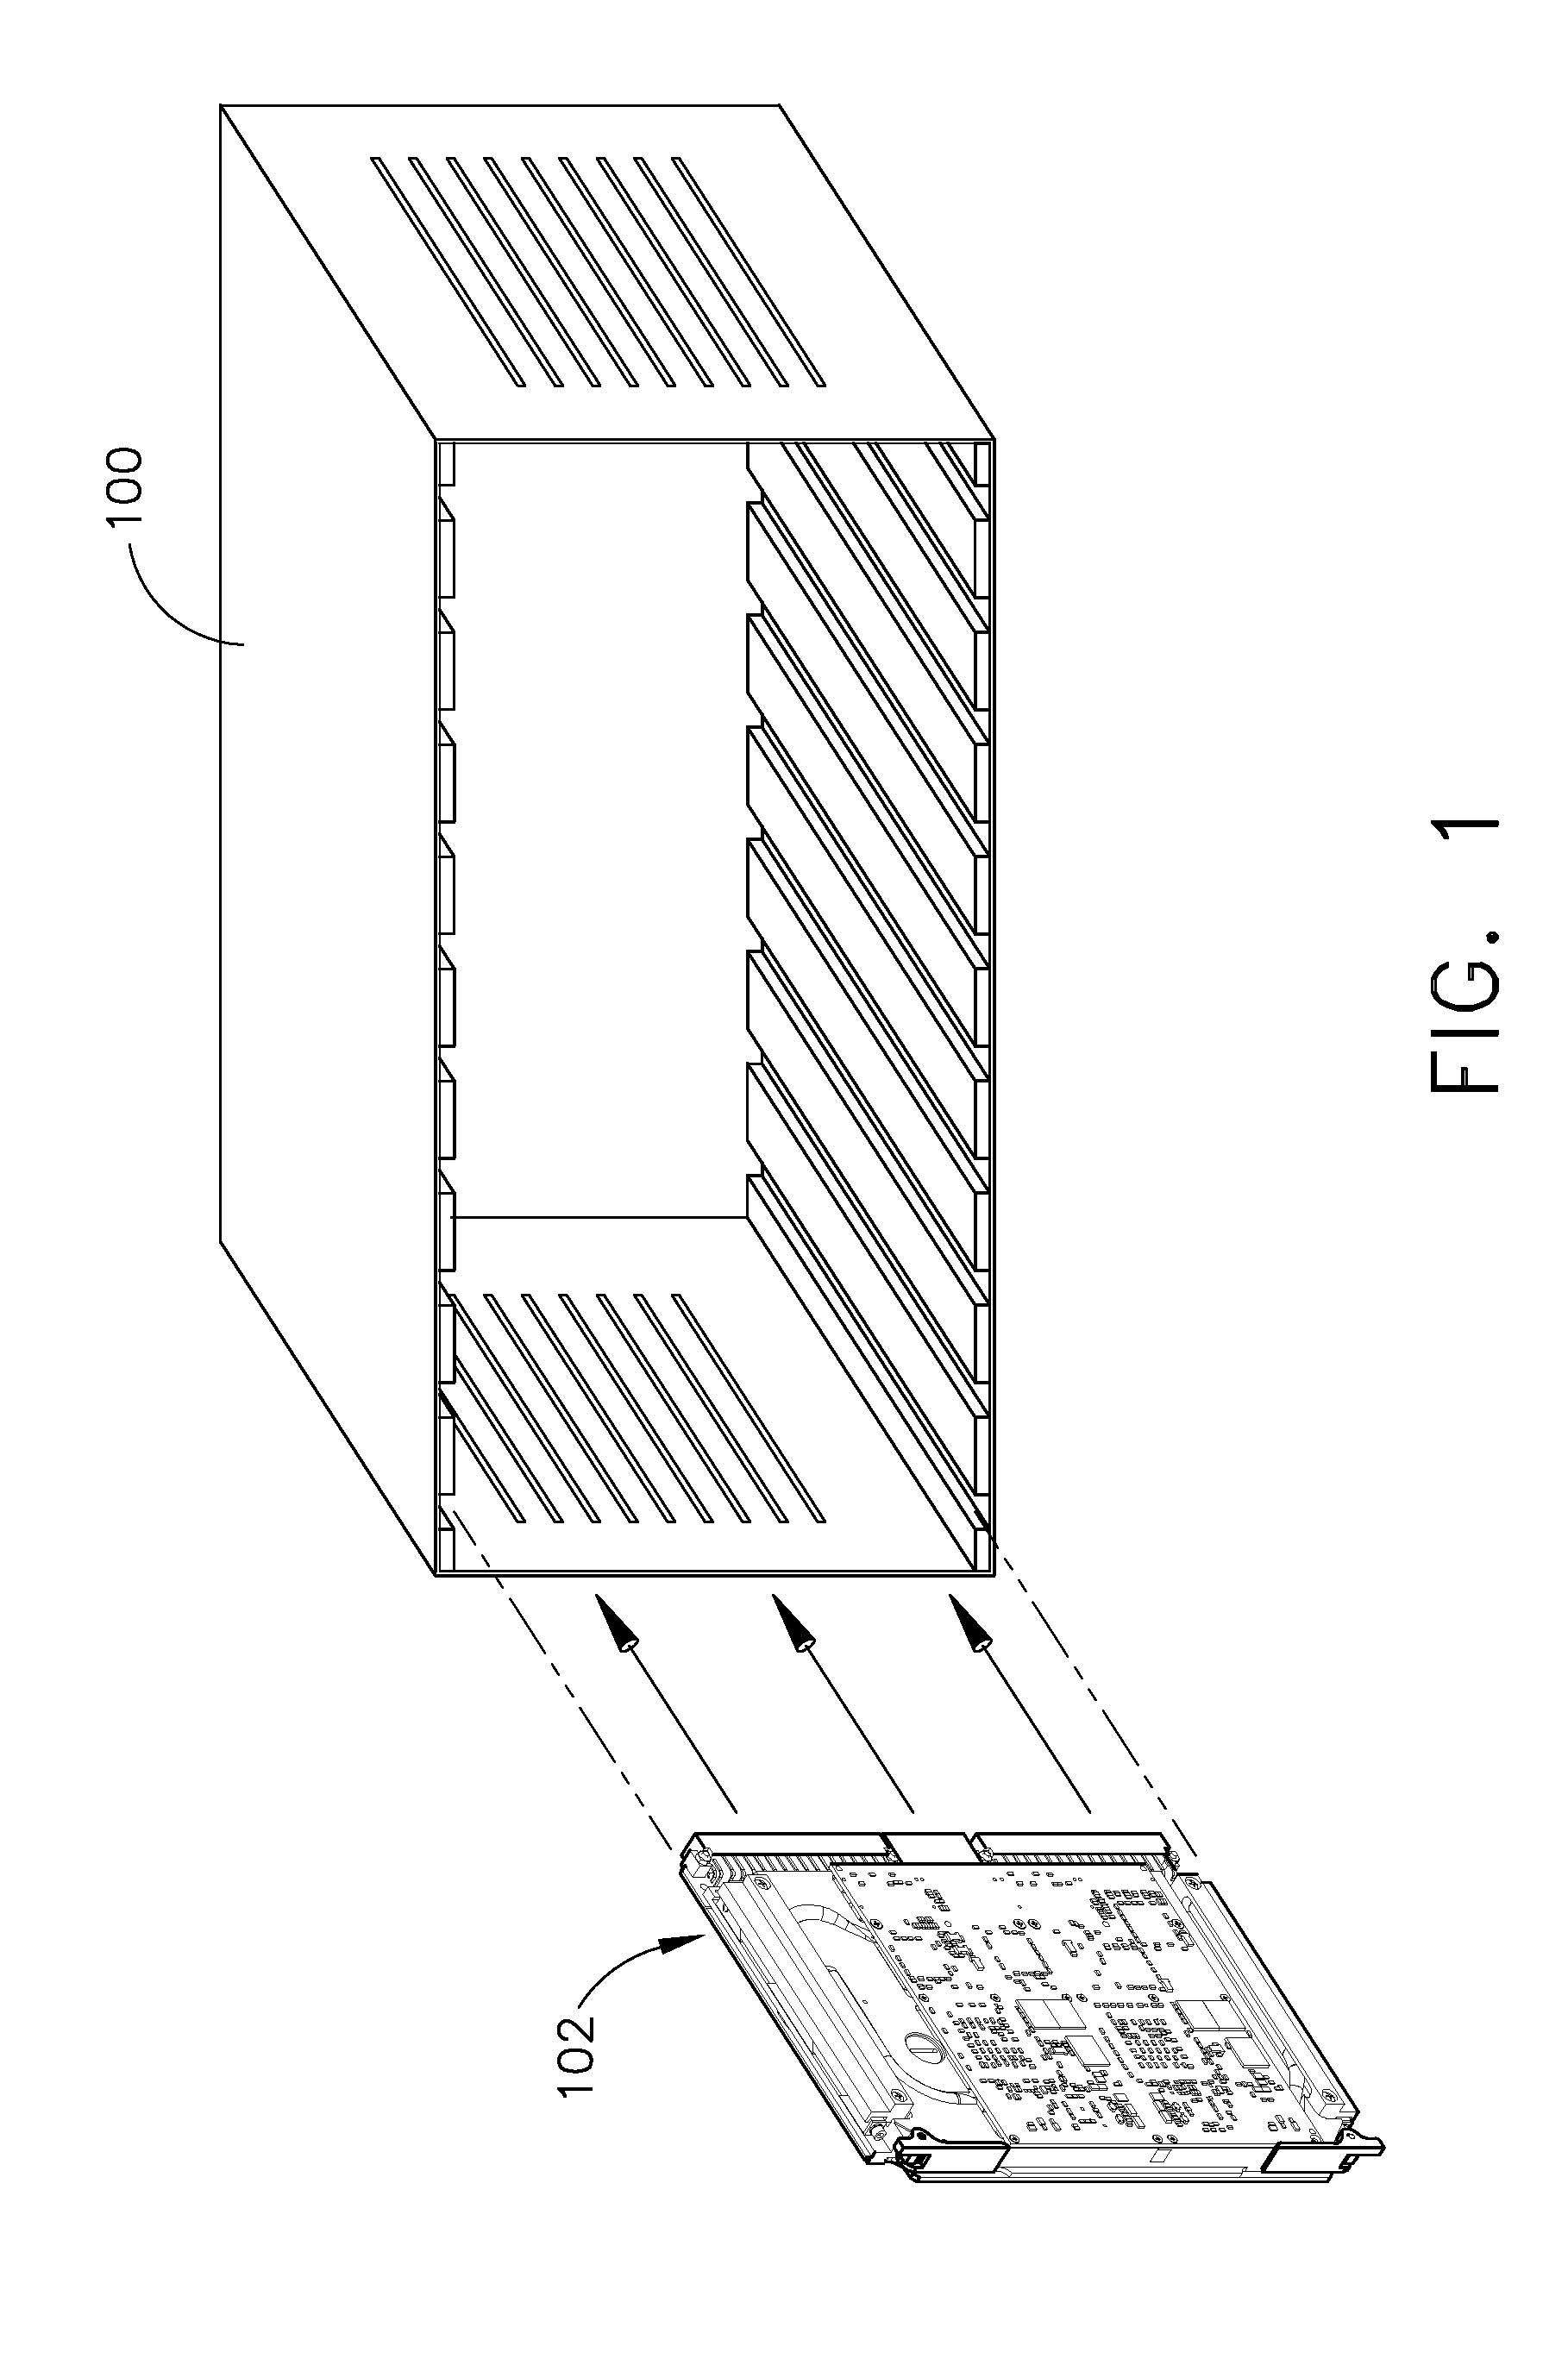 Conduction cooled circuit board assembly